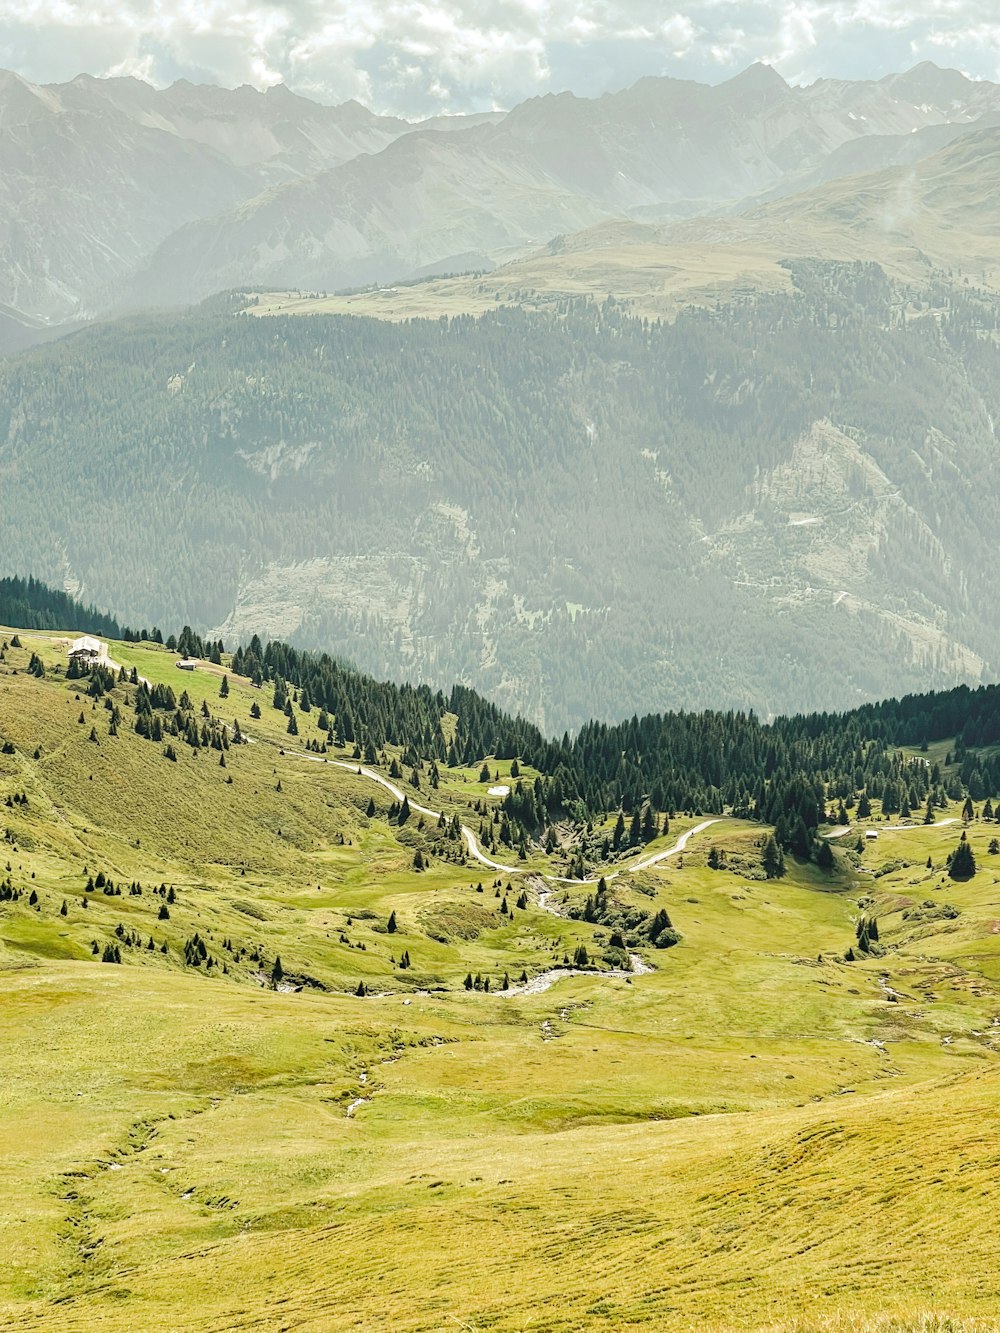 a grassy valley with mountains in the background